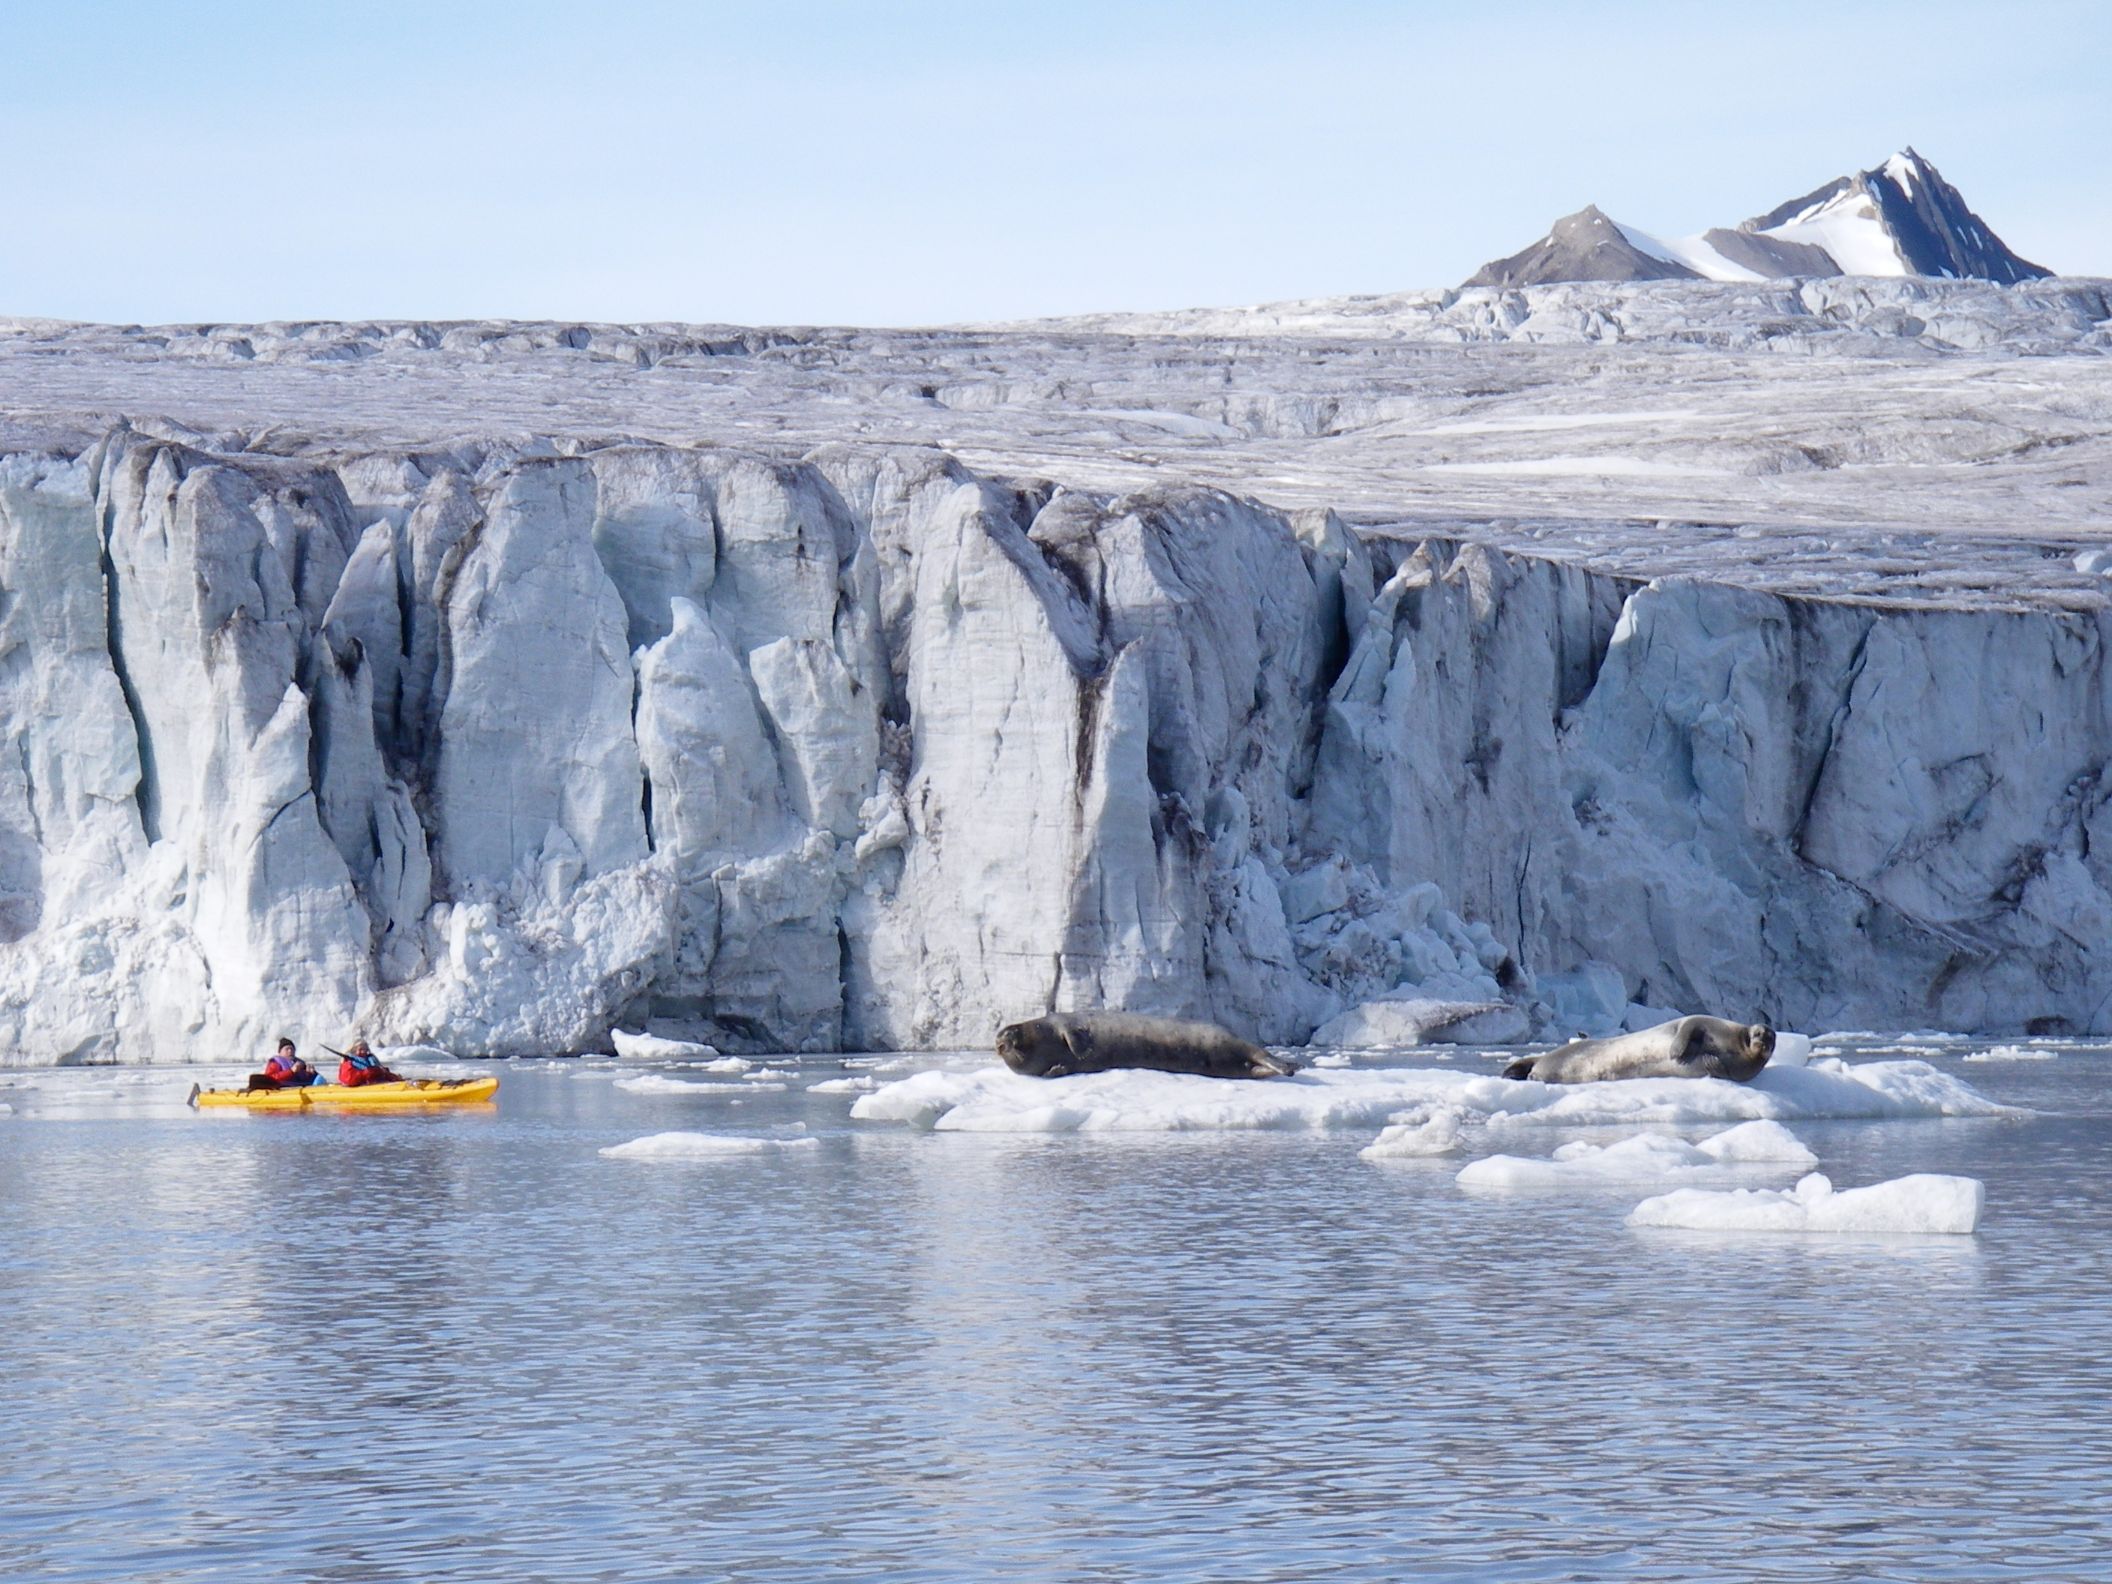 Two people in a kayak looking at seals on an iceberg in Svalbard